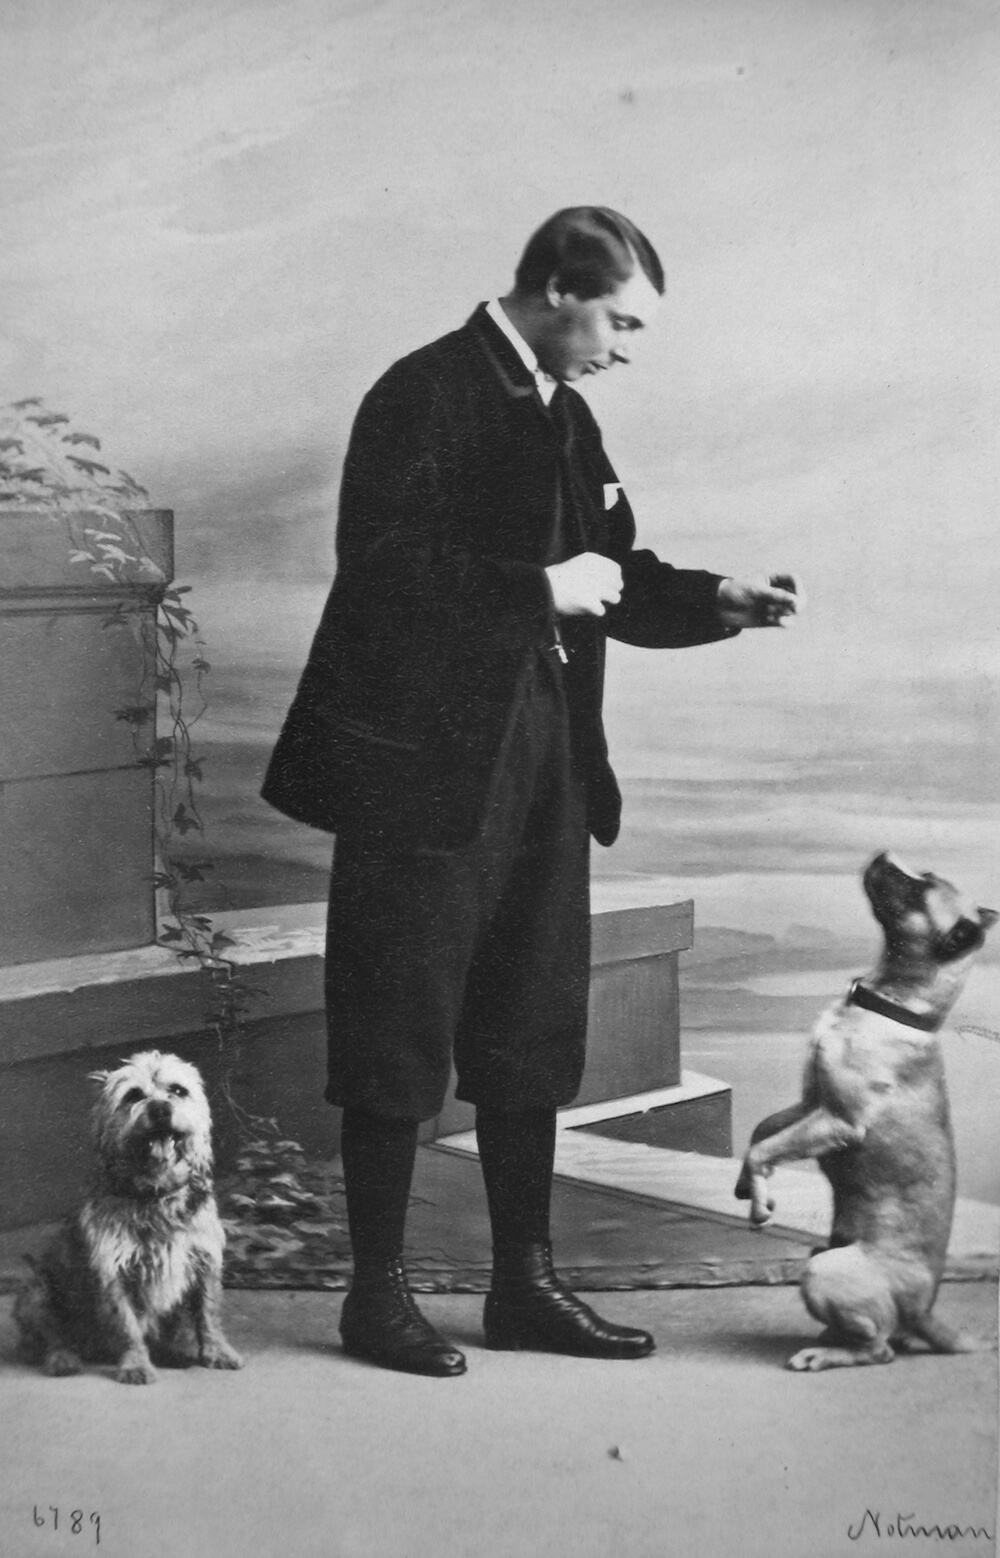 1863 - Capt. Littleton and dogs, Montreal